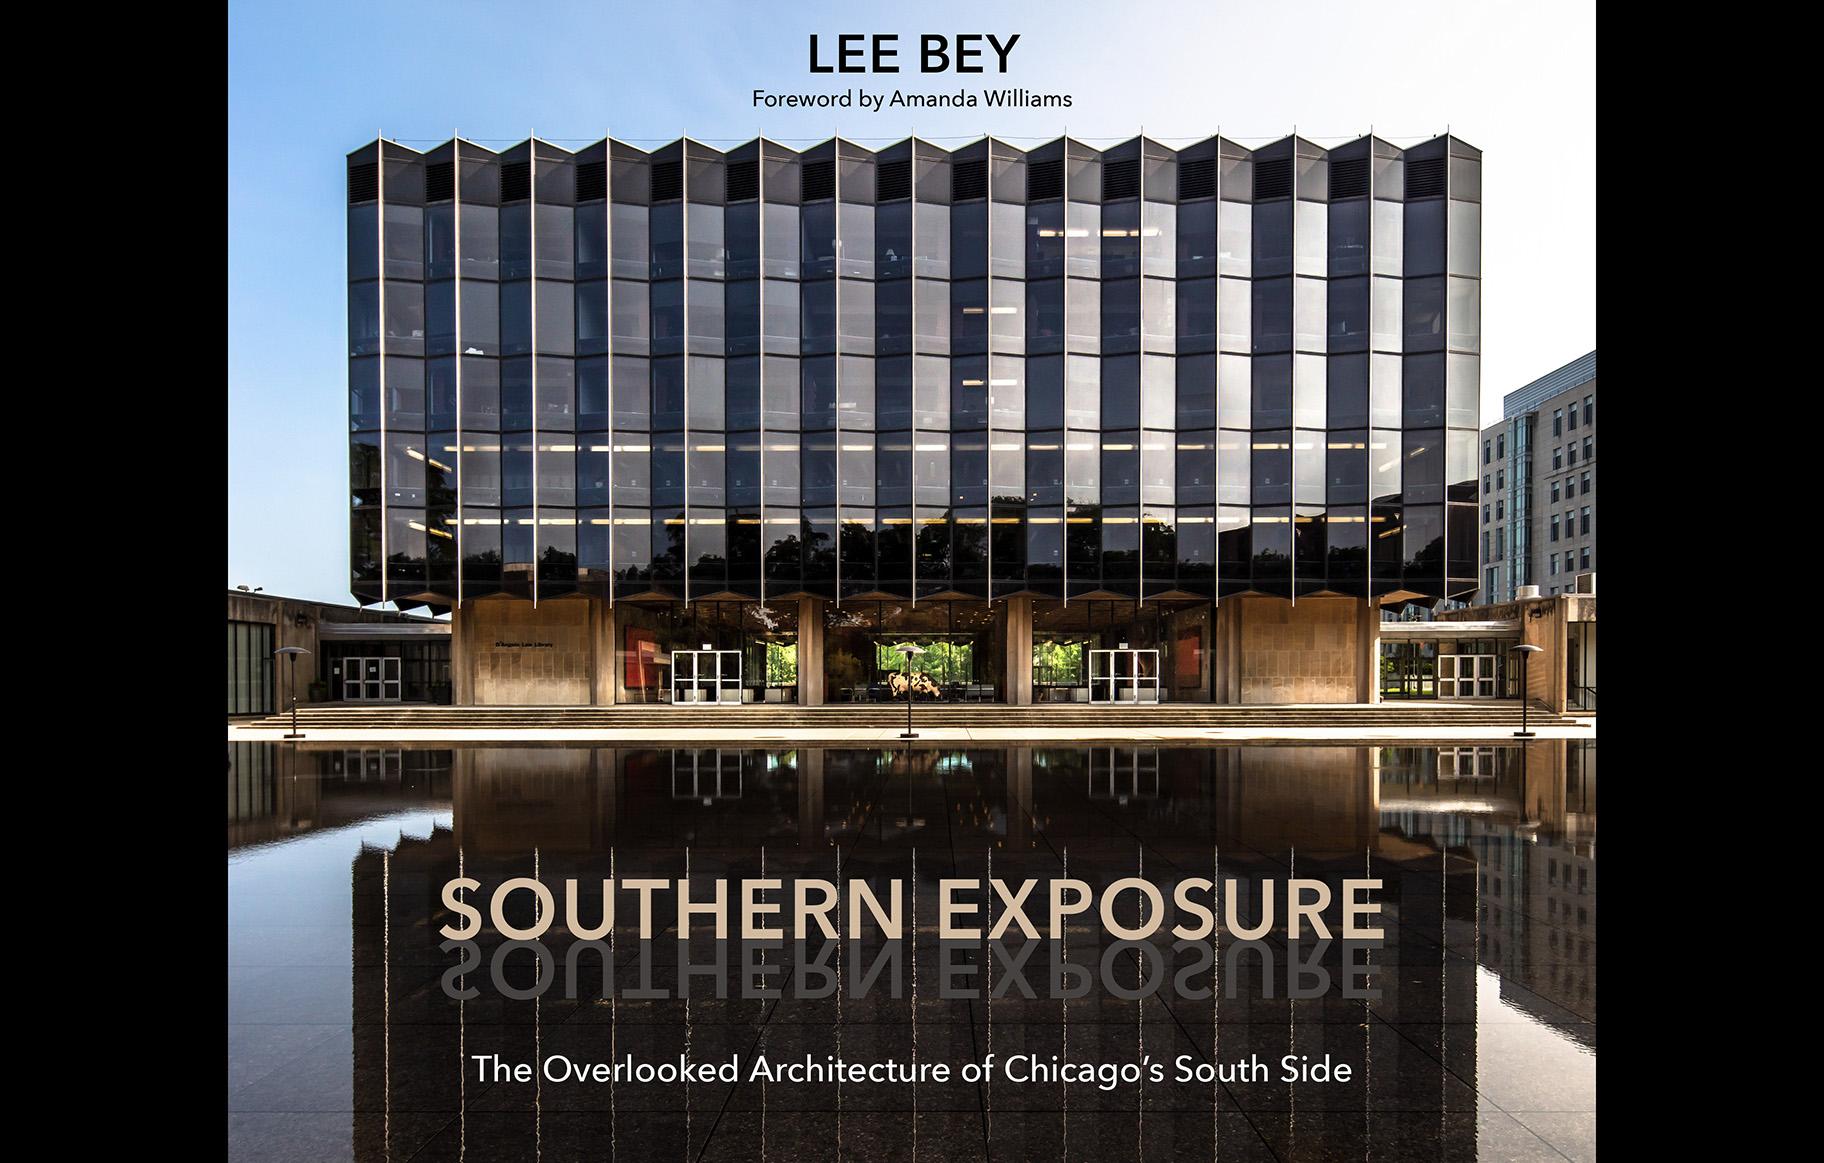 Lee Bey’s new book explores architectural gems on Chicago’s South Side, such as the University of Chicago’s Law School. (Lee Bey / Northwestern University Press) 